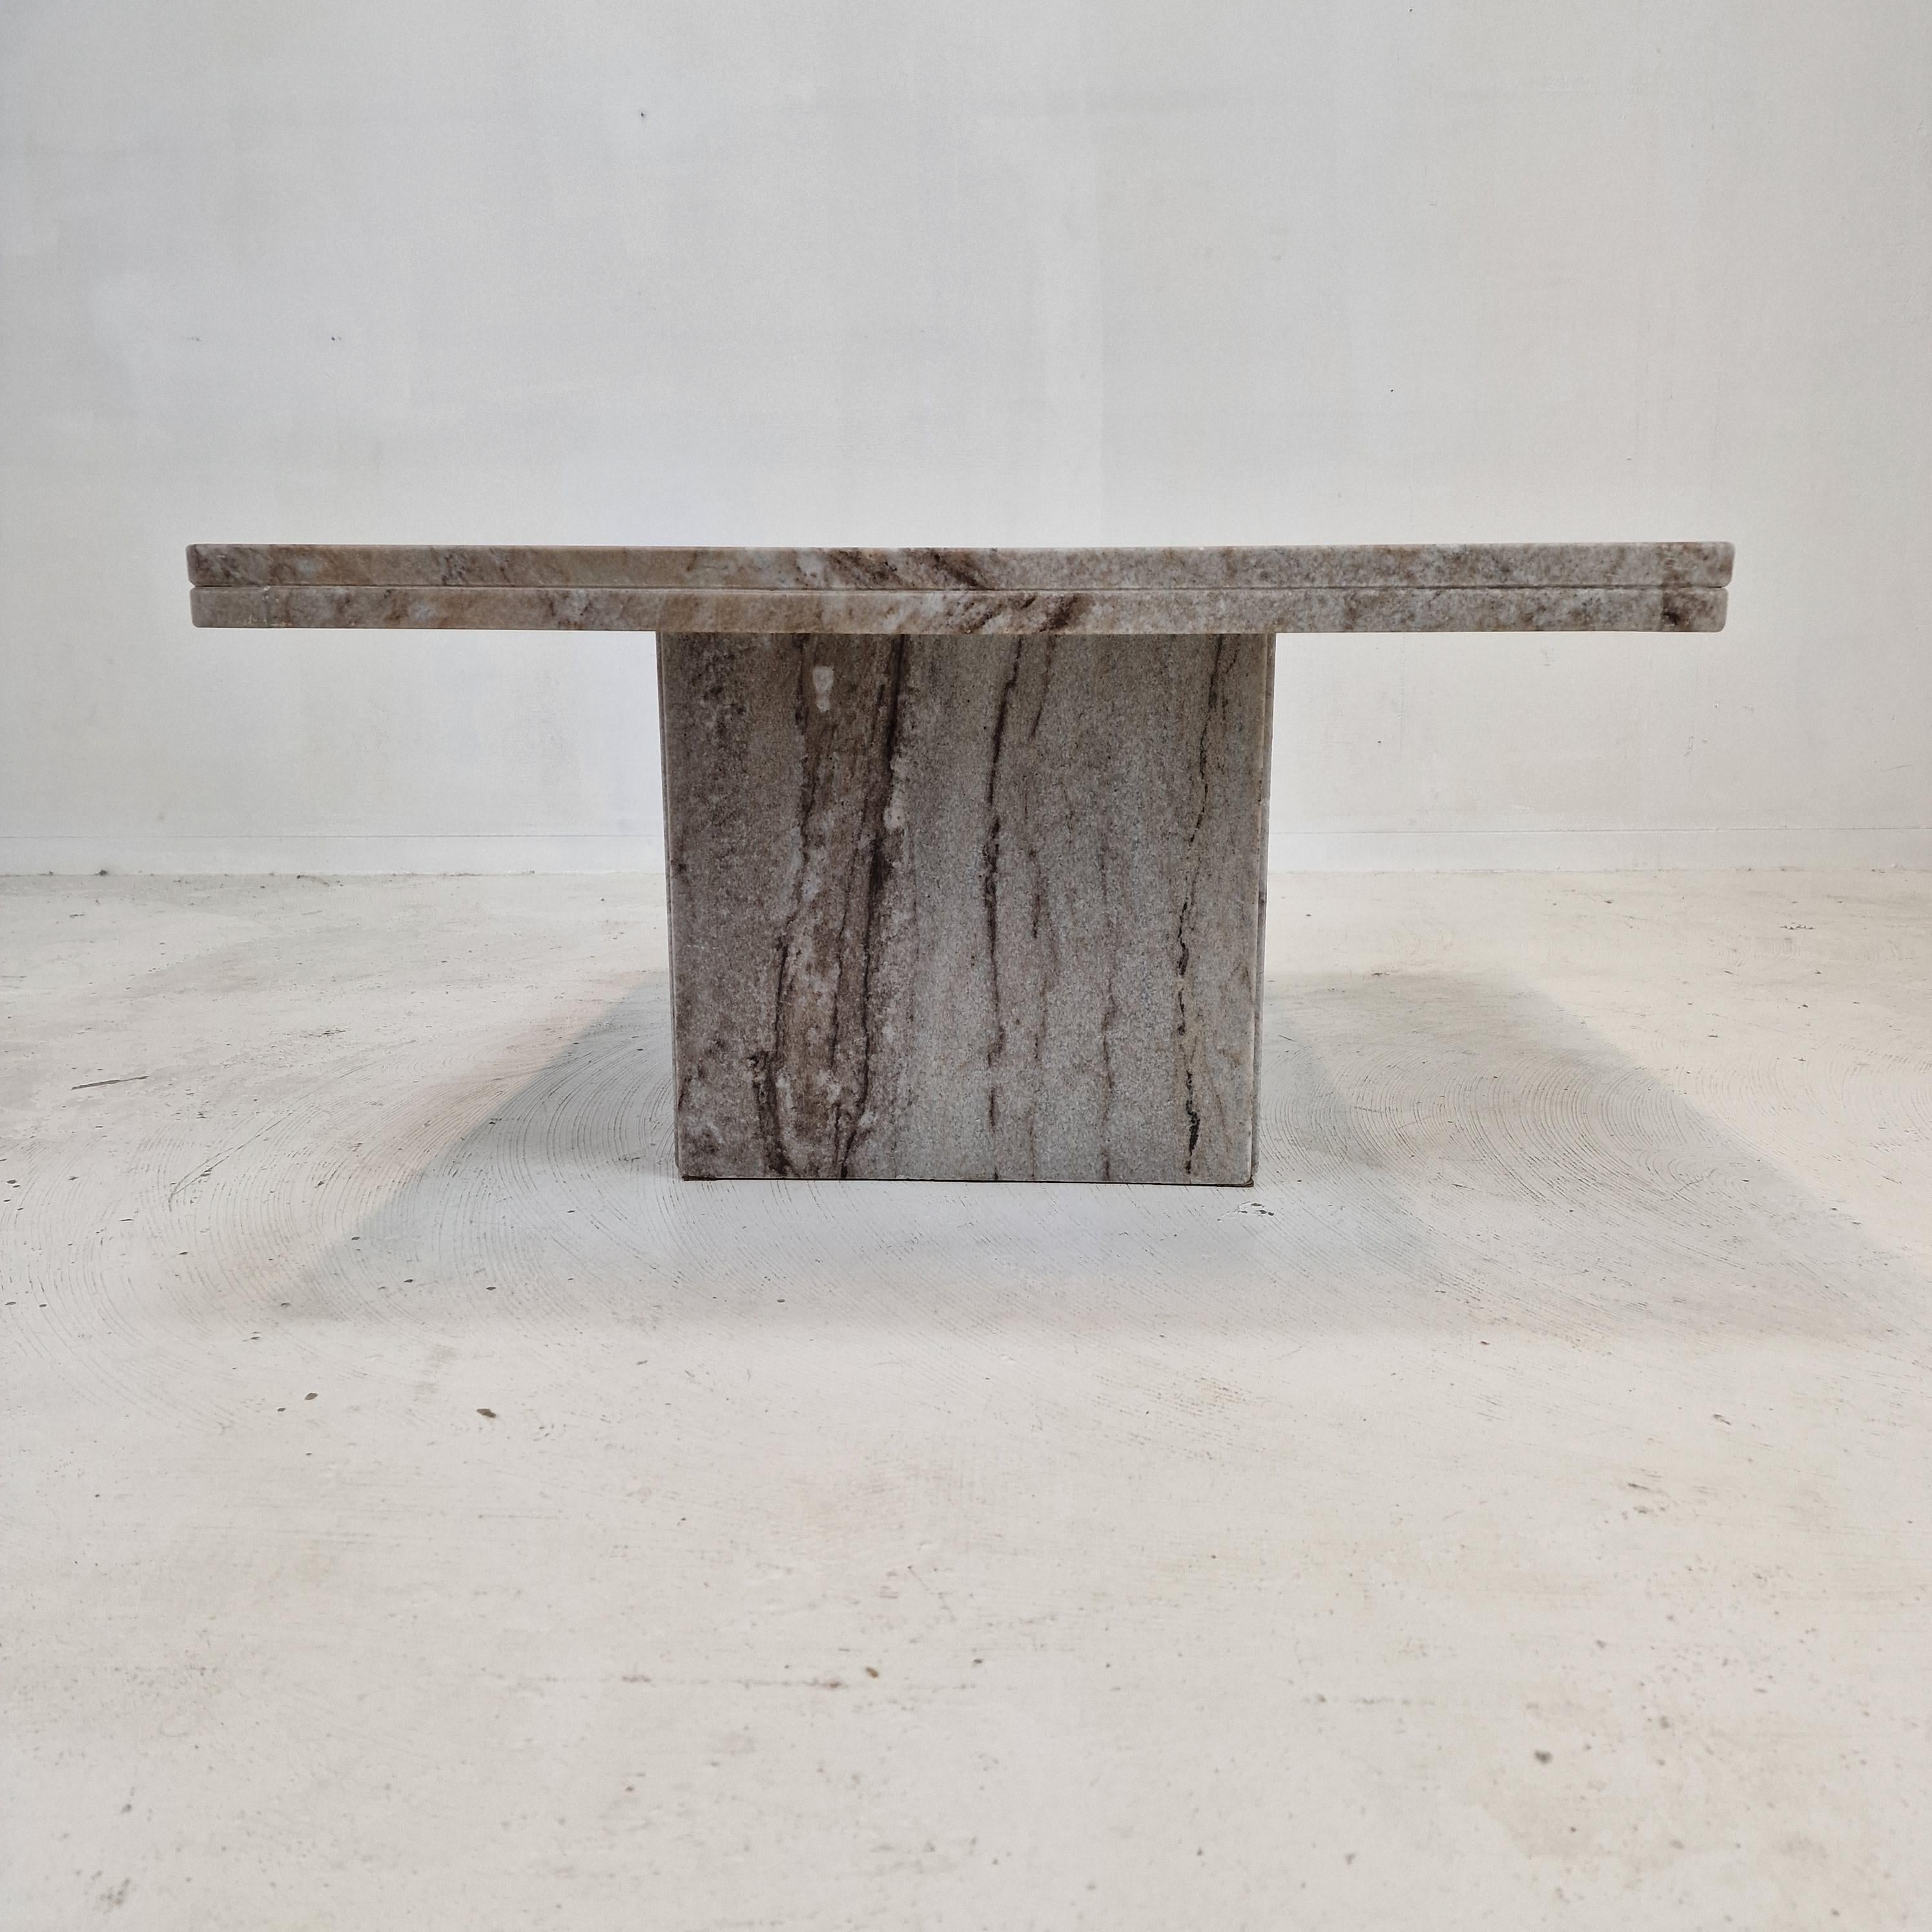 Italian Coffee or Side Table in Granite, 1980s For Sale 1